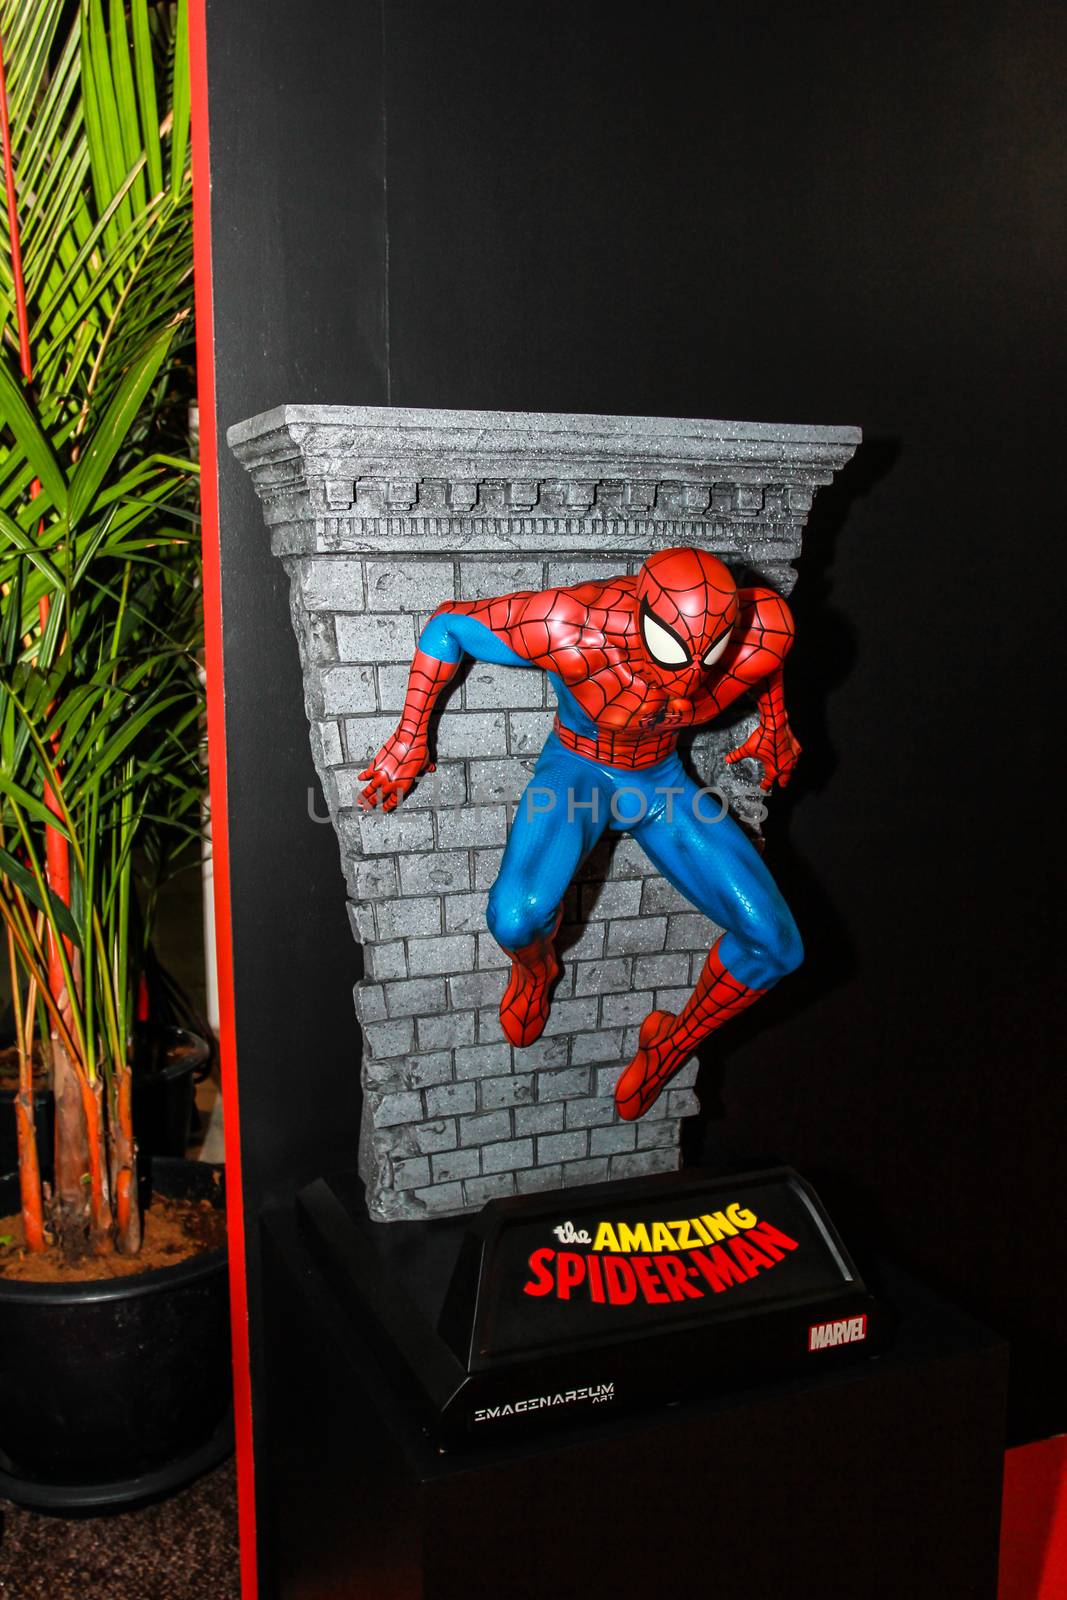 A model of the character Spiderman from the movies and comics by redthirteen